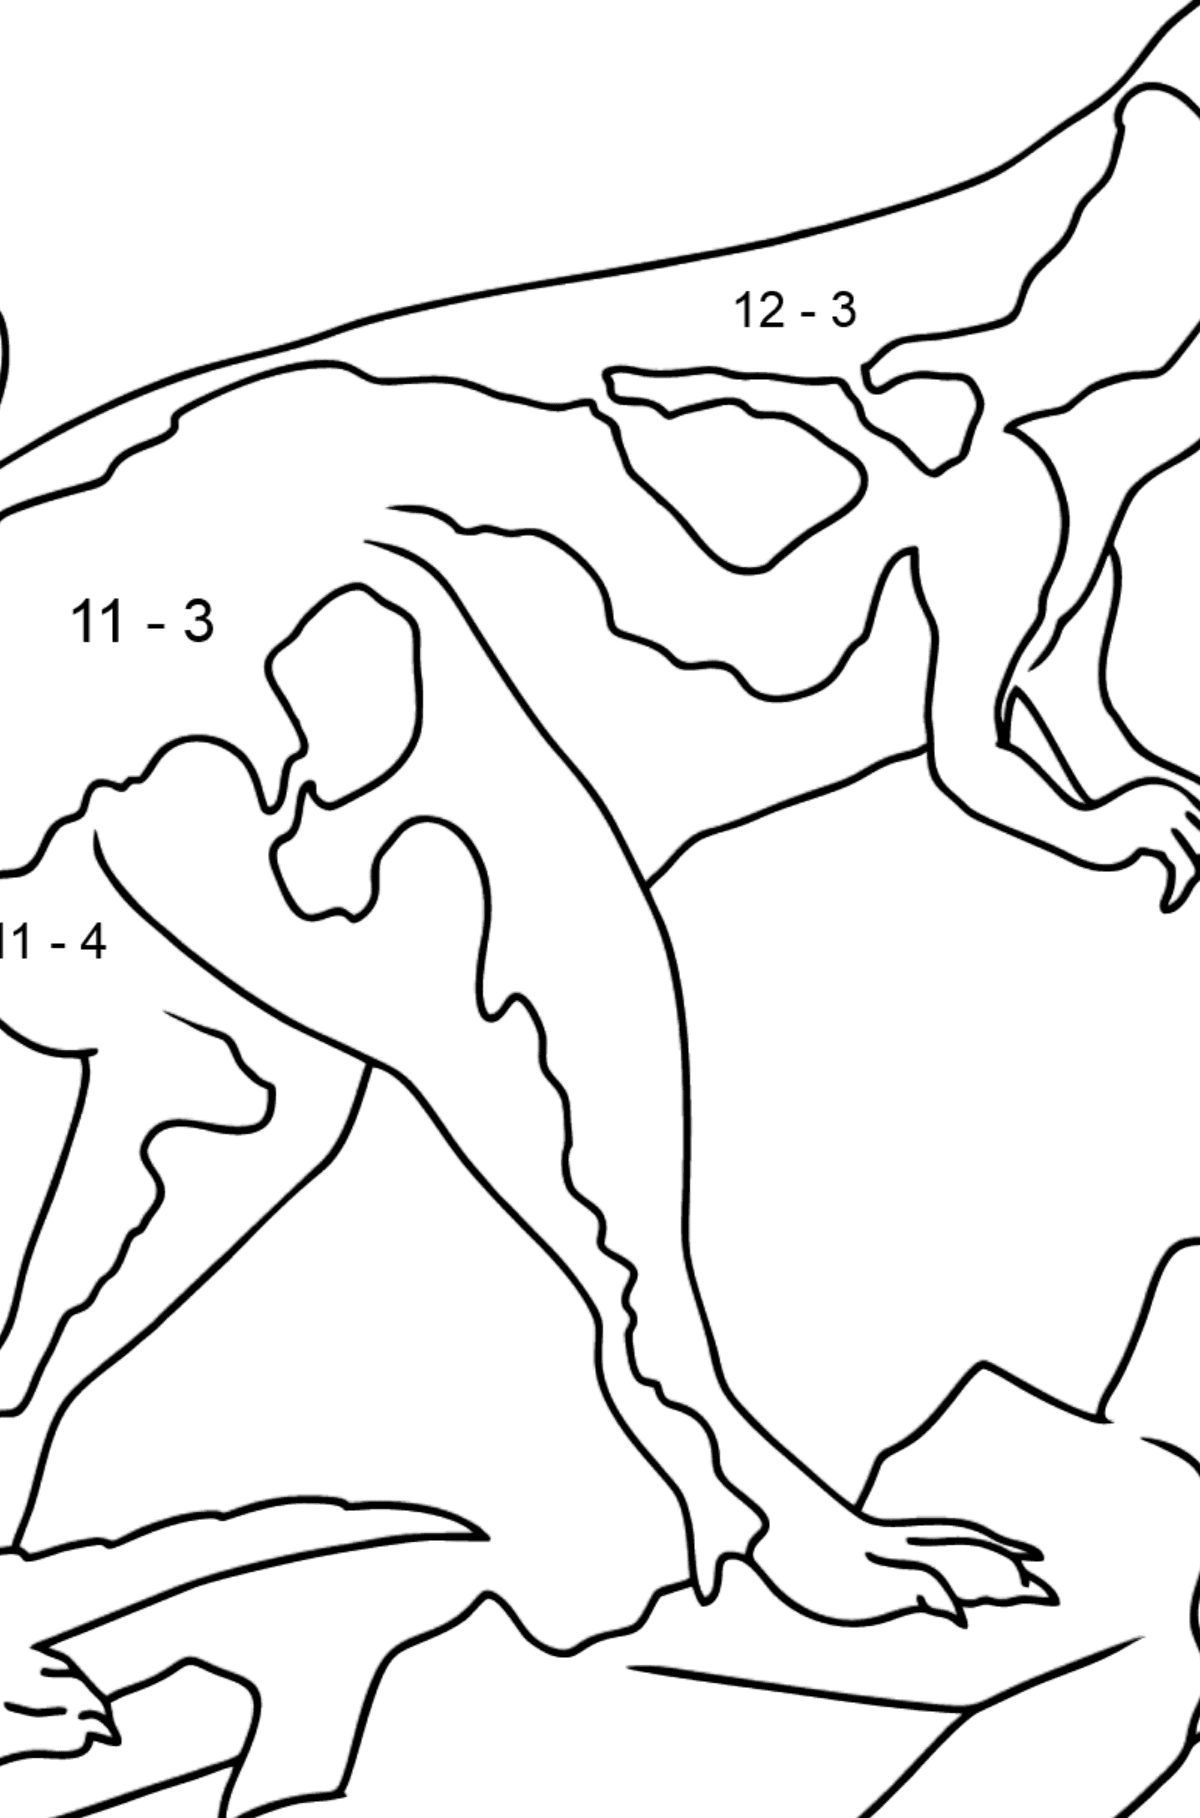 Tyrannosaurus Coloring Page - Math Coloring - Subtraction for Kids